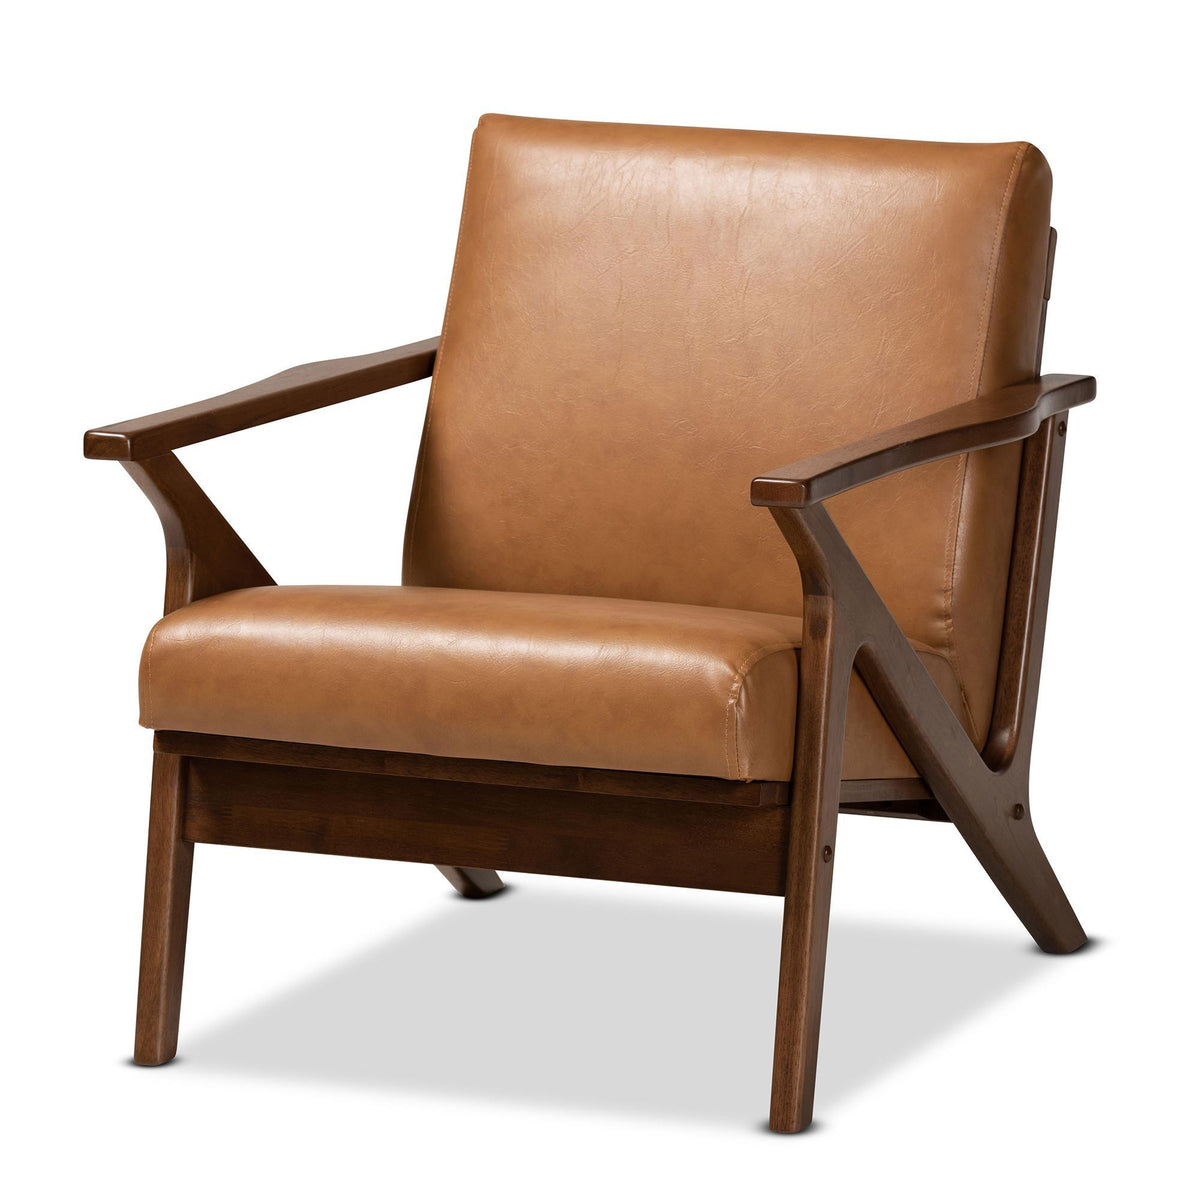 Baxton Studio Bianca Mid-Century Modern Walnut Brown Finished Wood And Tan Faux Leather Effect Lounge Chair - Bianca-Tan/Walnut Brown-CC